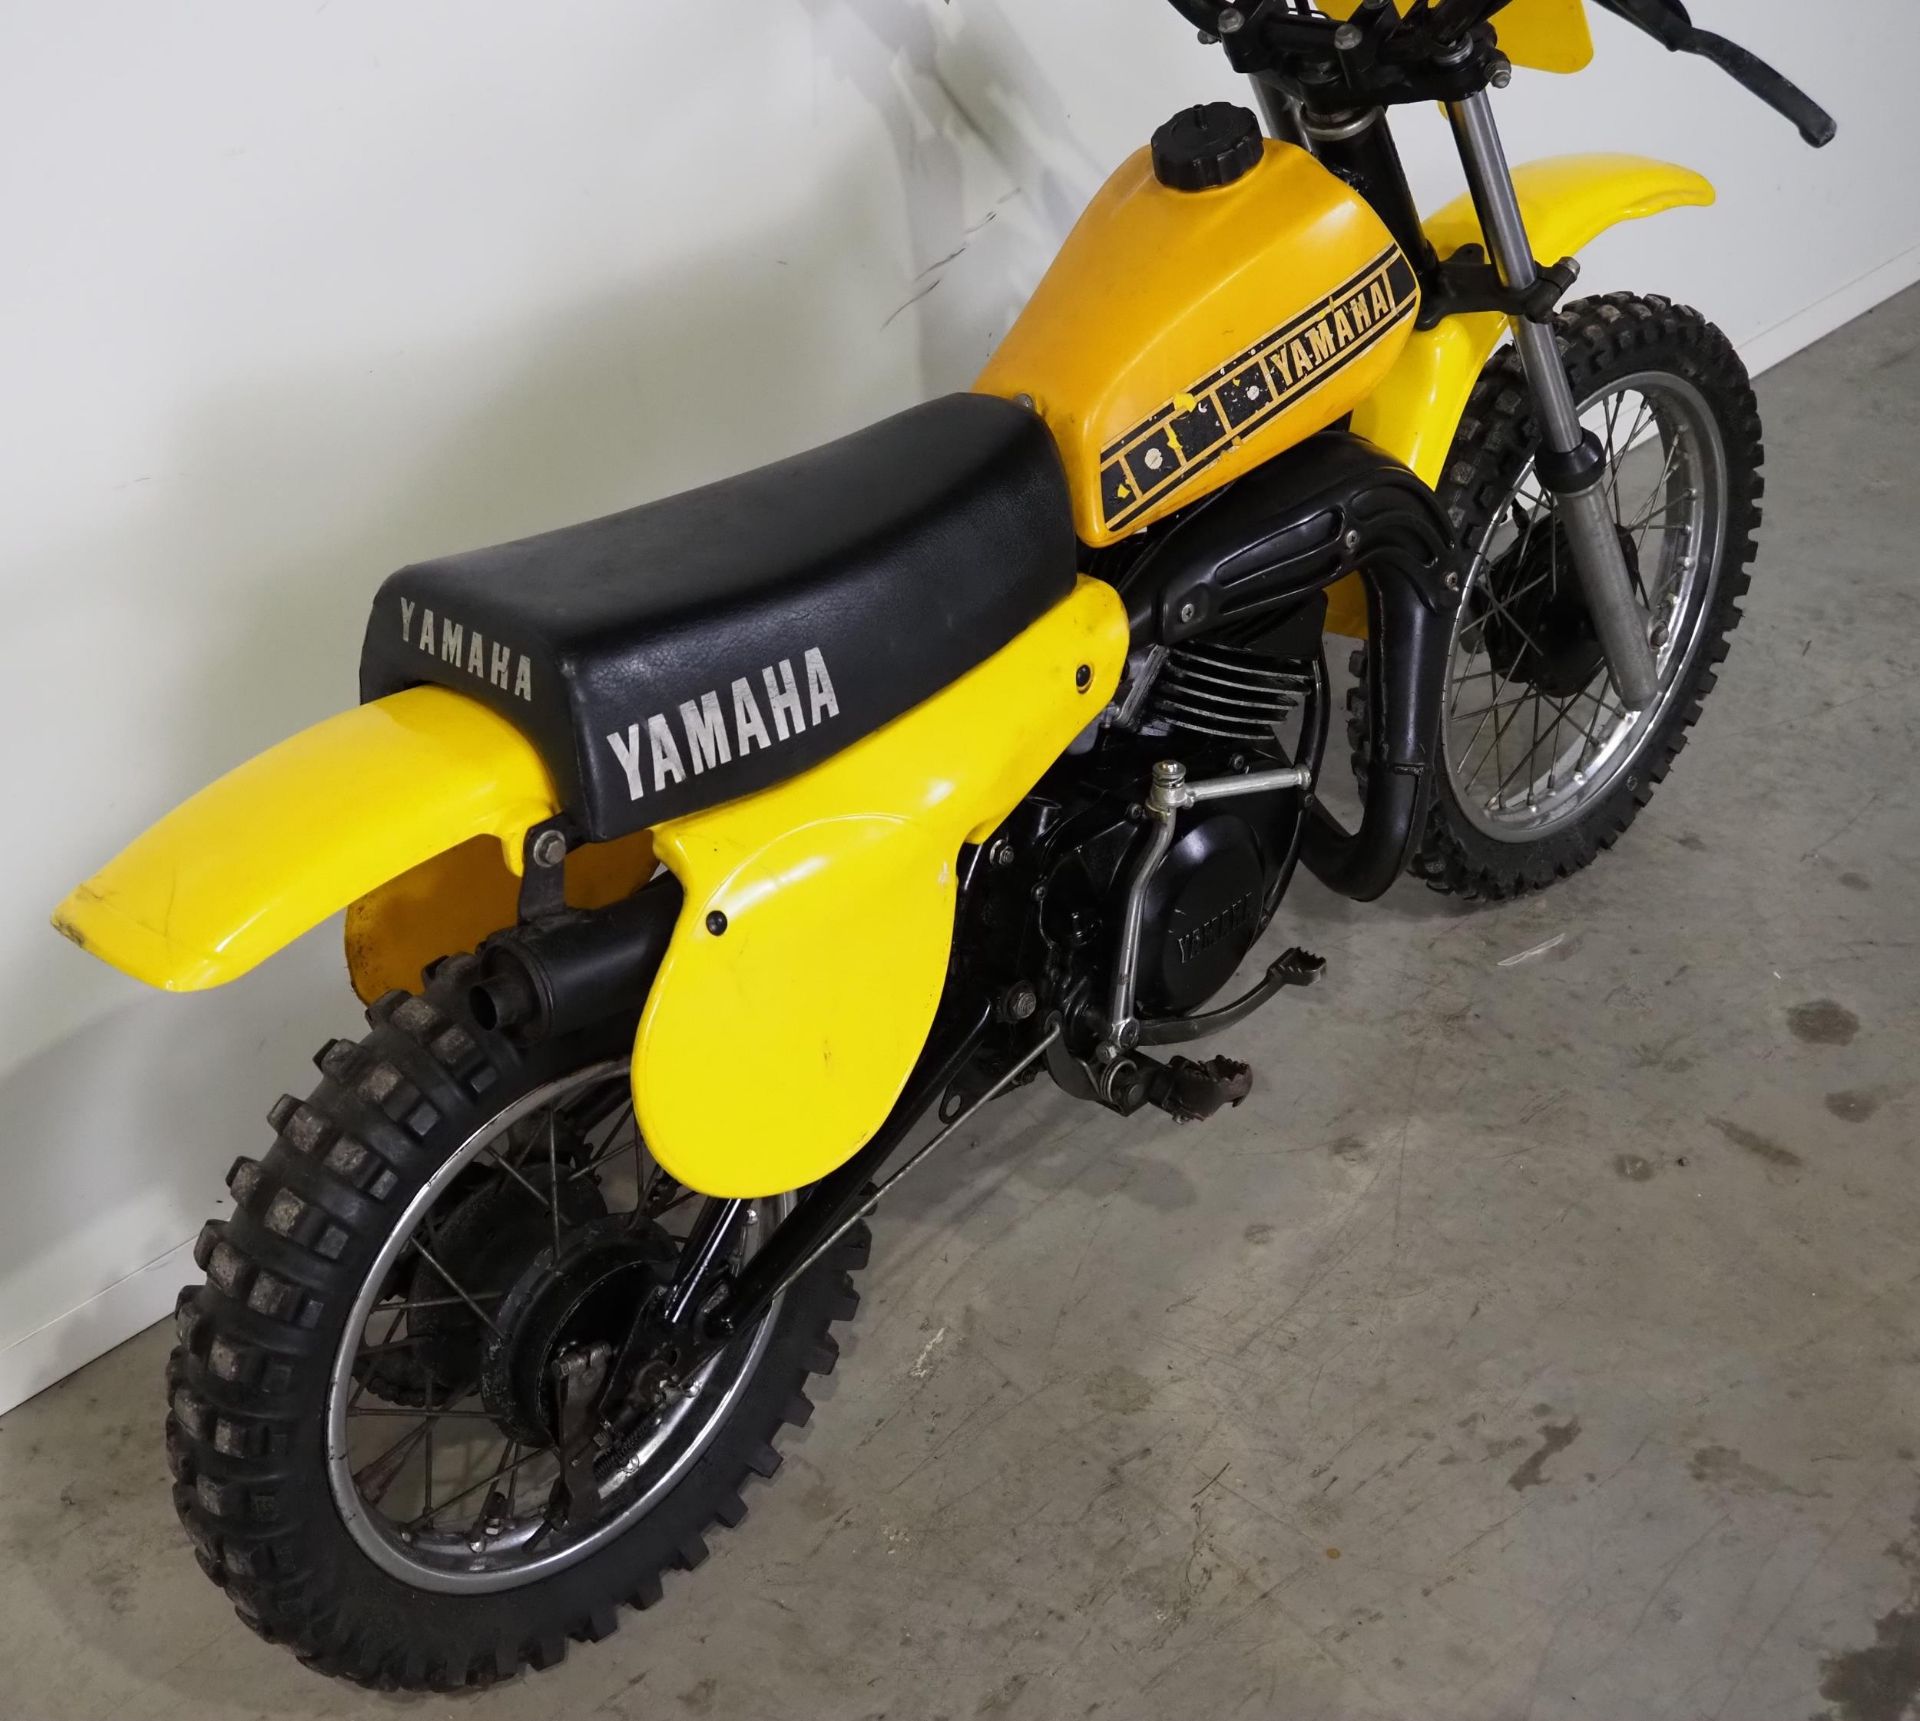 Yamaha YZ 50 motorcycle. Frame No- 3R0-003975 Runs and rides, came from a collection in Florida - Image 6 of 7